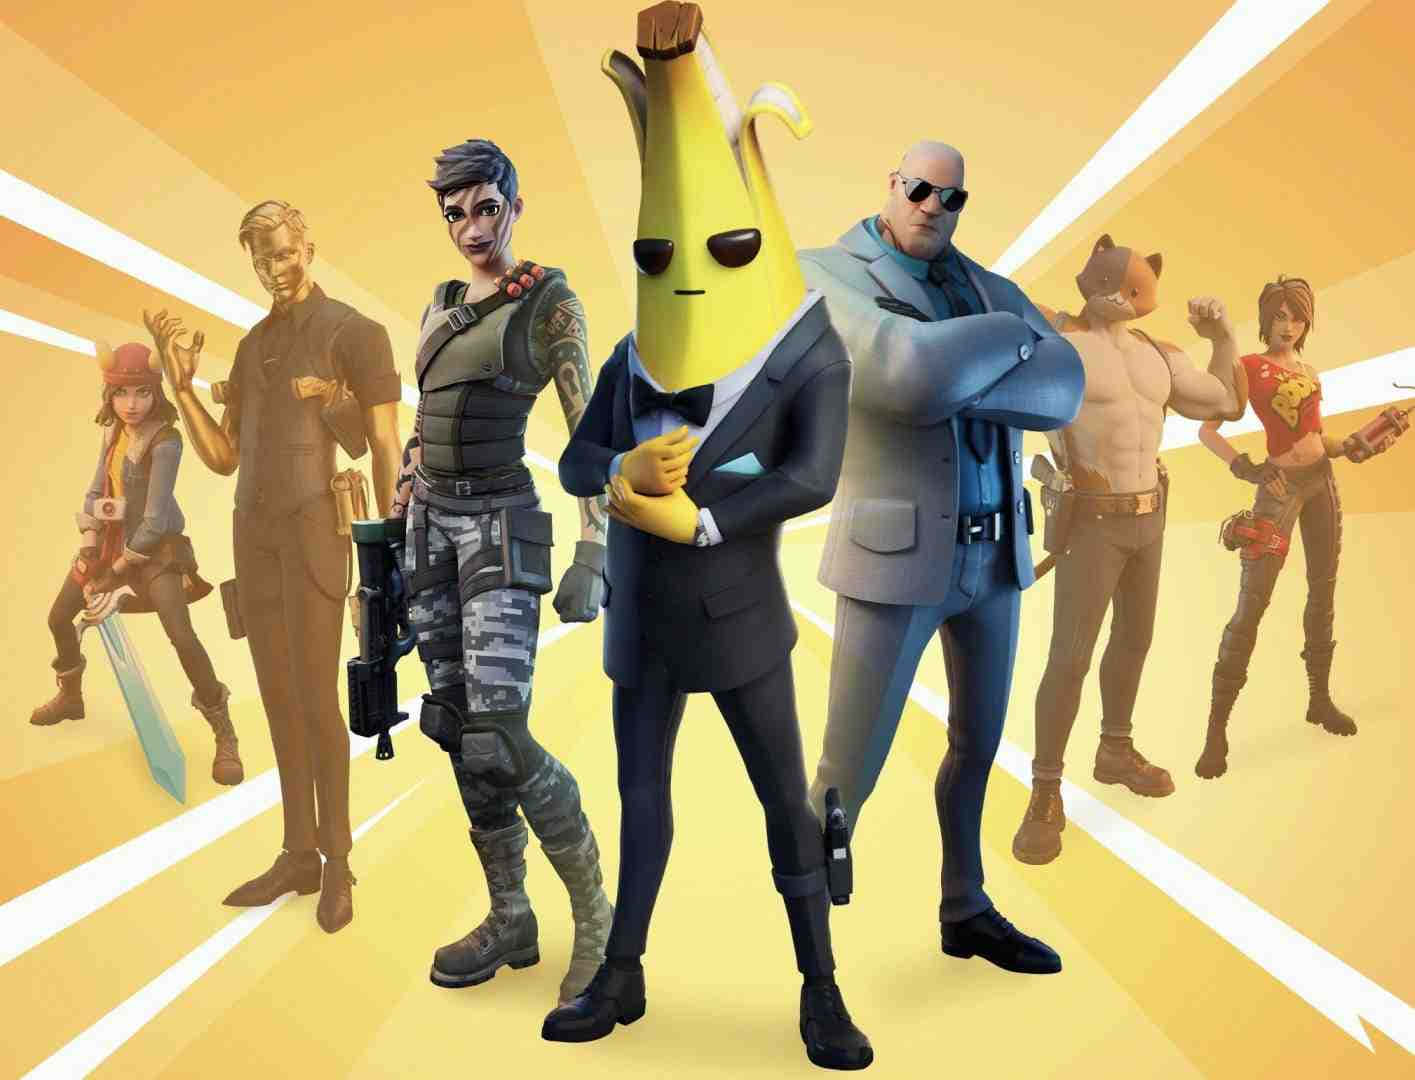 Share Your Best Dance Moves With Fortnite Peely! Wallpaper